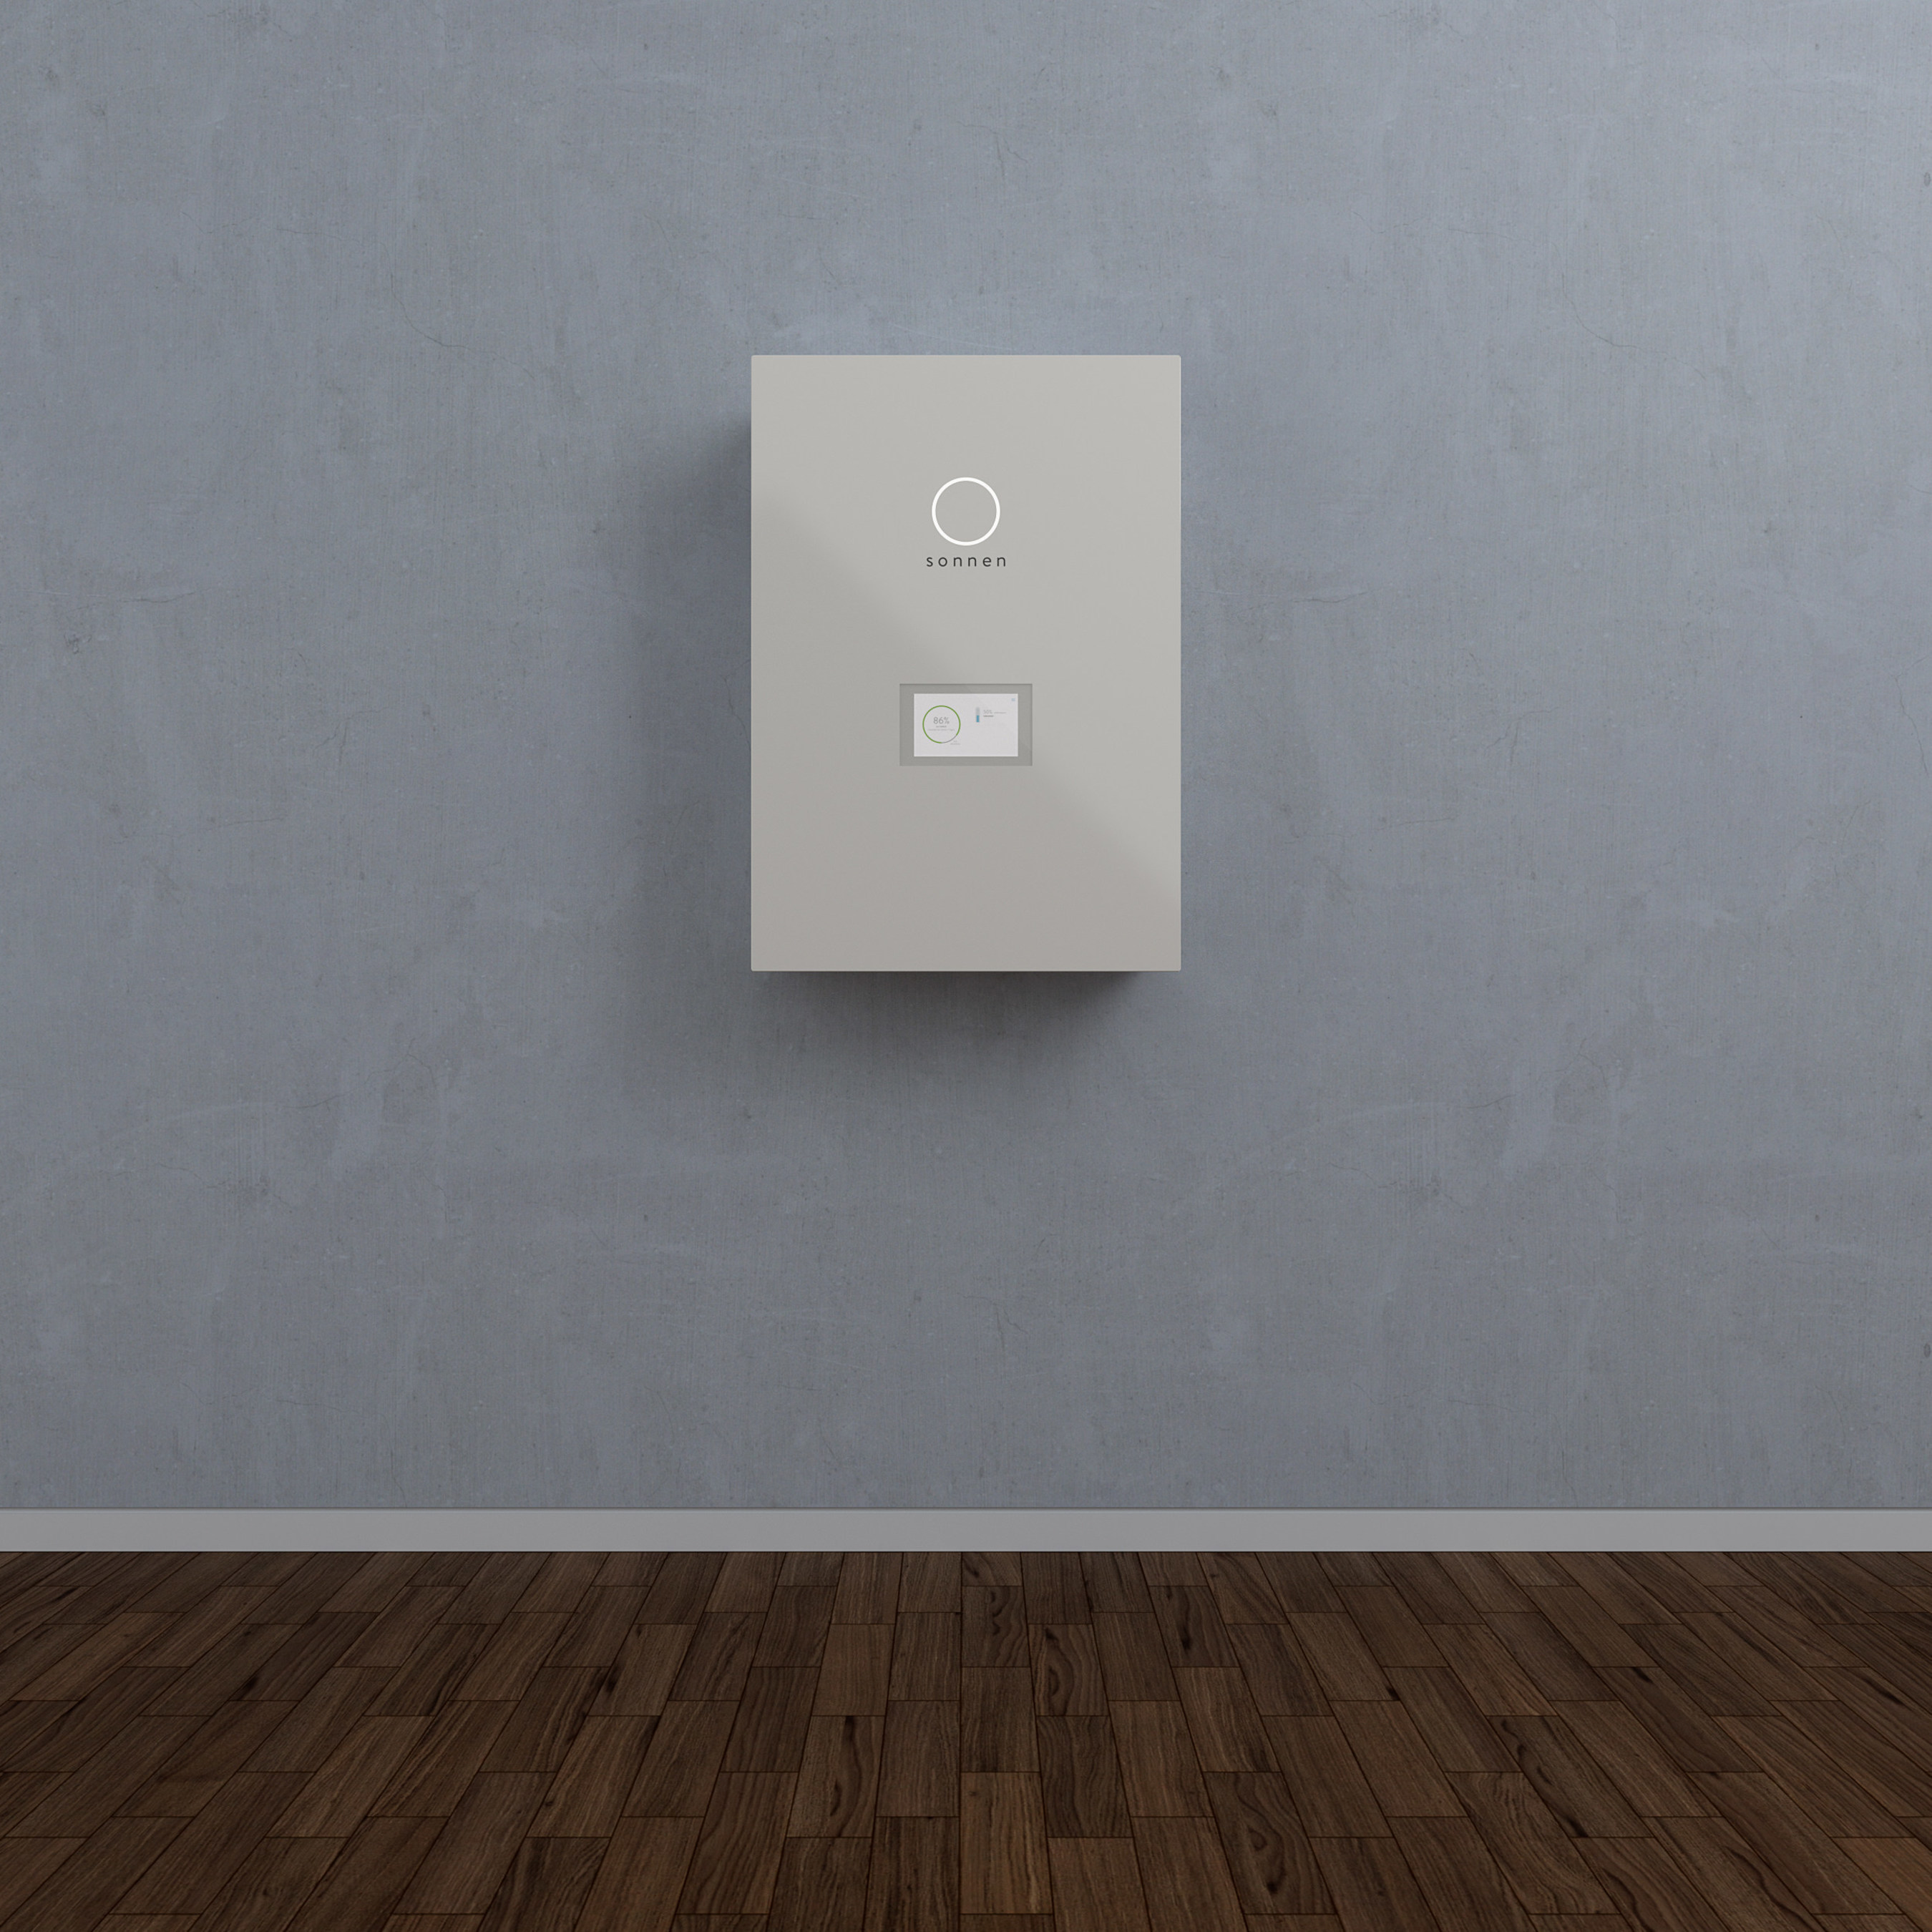 sonnen's latest smart energy management solution - the sonnenBatterie eco compact - scales from 4kWh to 16kWh and increases solar self-consumption for residential customers.